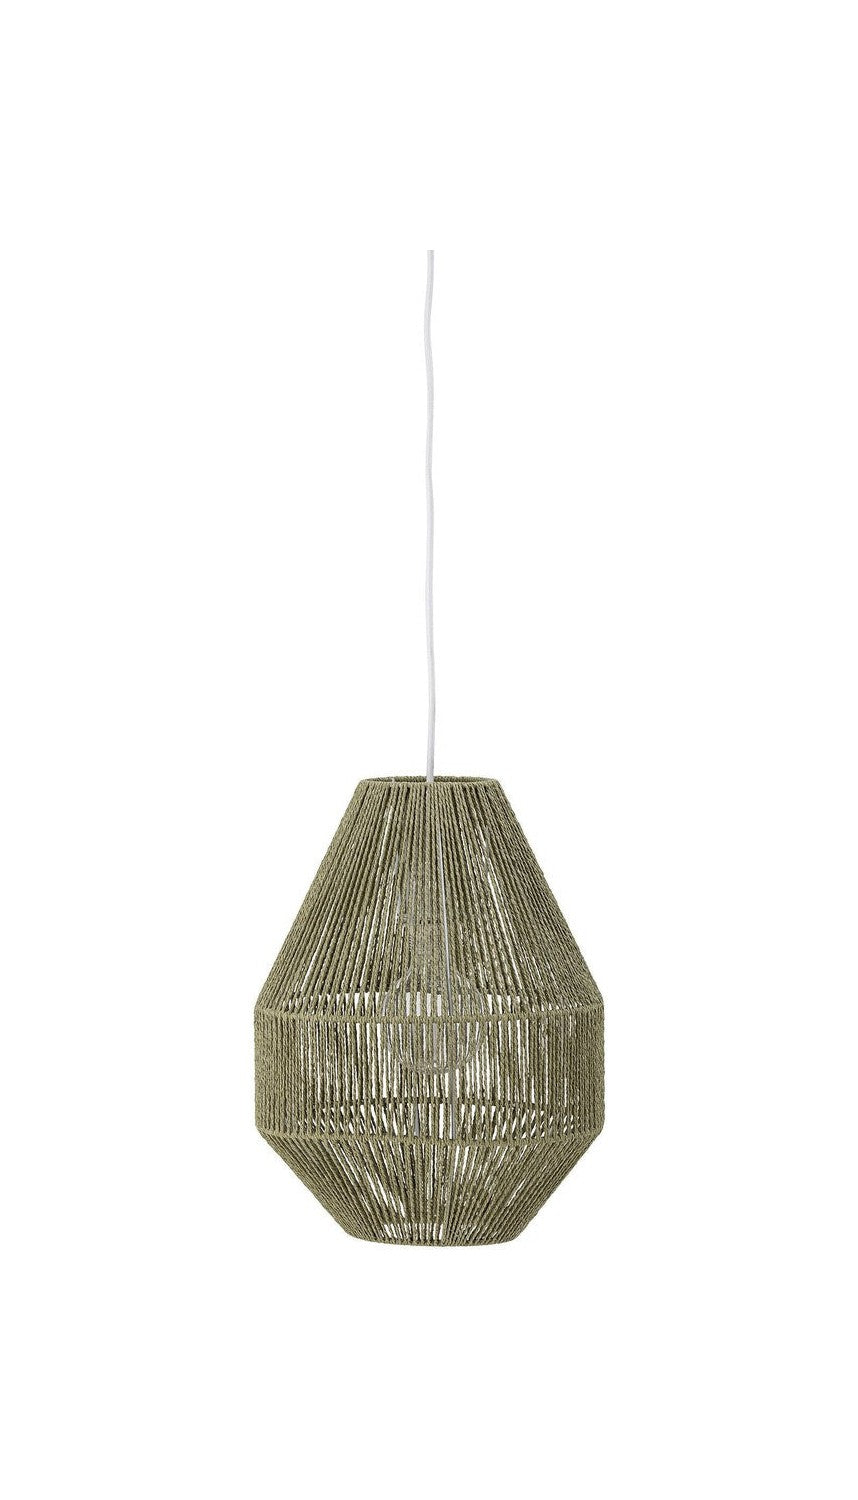 Creative Collection Sacco Pendant Lamp, Green, Paper